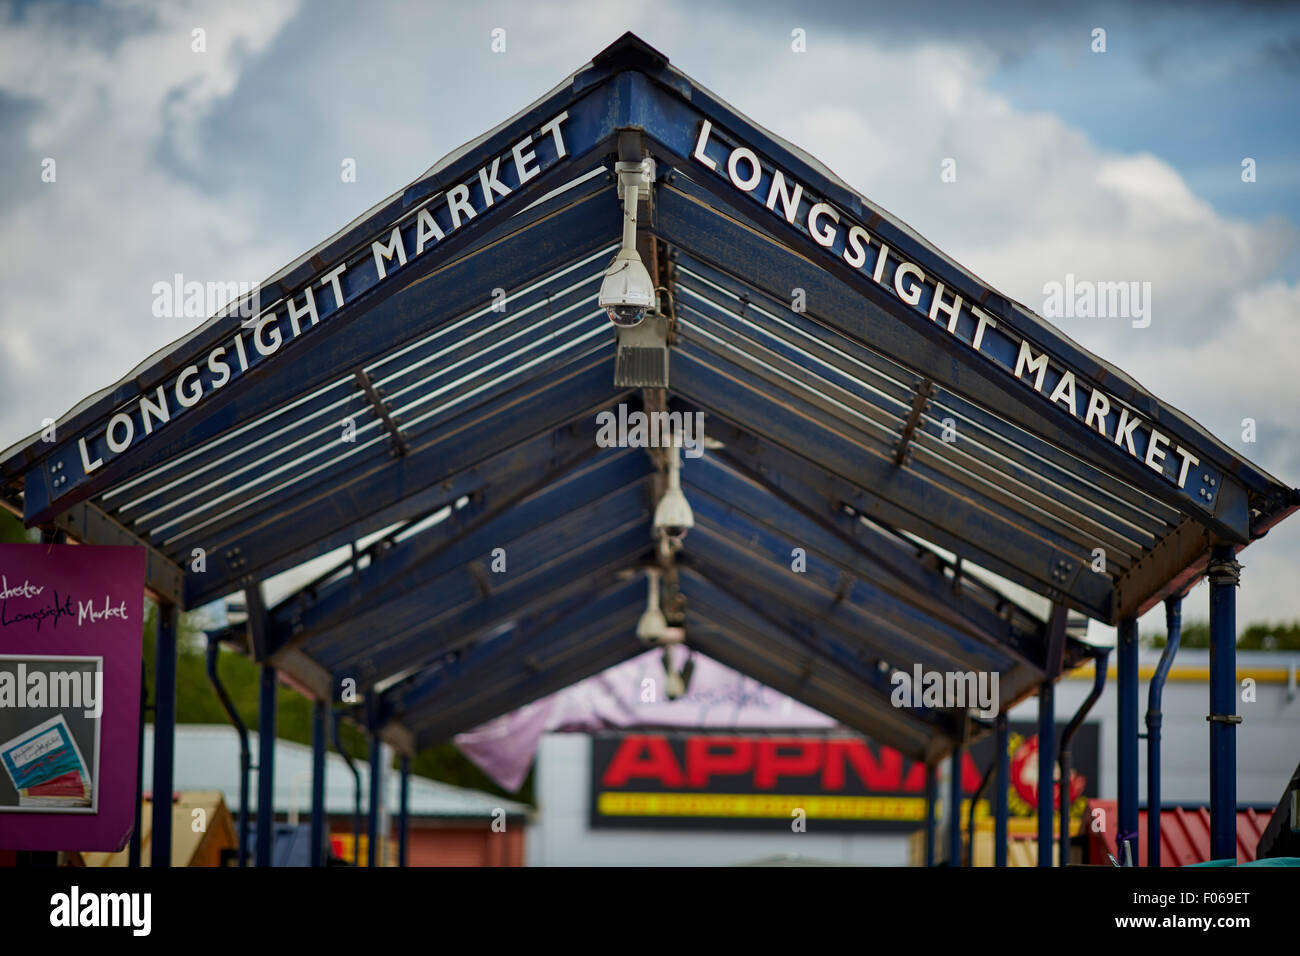 Longsight market in Manchester Uk  Shop shopping shopper store retail supermarket retailer retailers traders trading outlet buyi Stock Photo